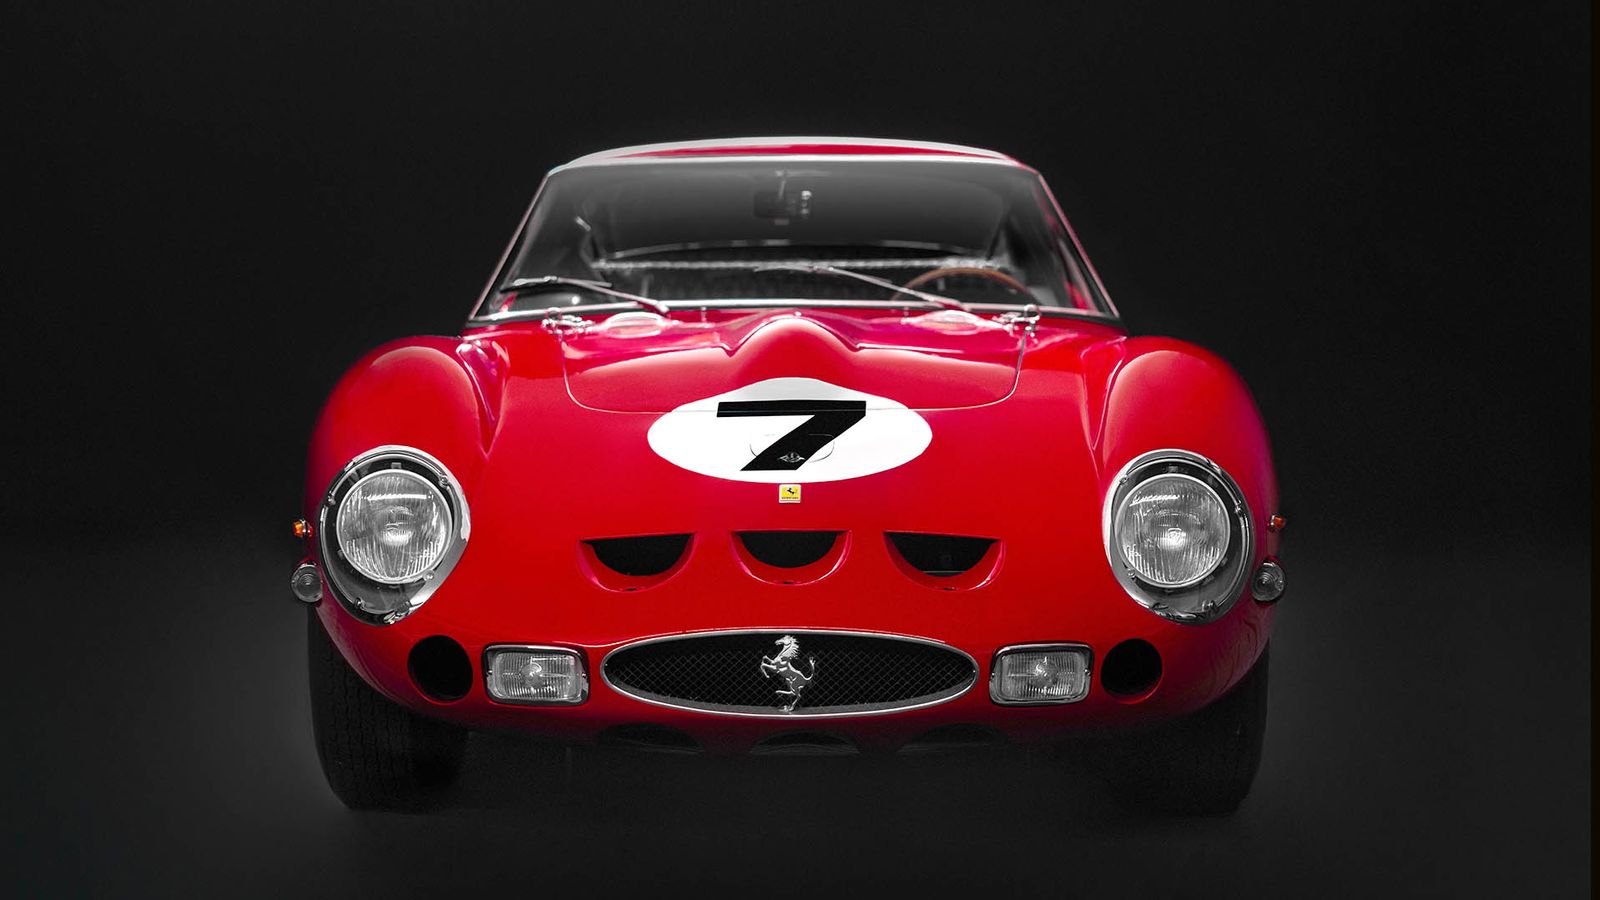 Iconic 1962 race car becomes most expensive Ferrari ever sold at auction